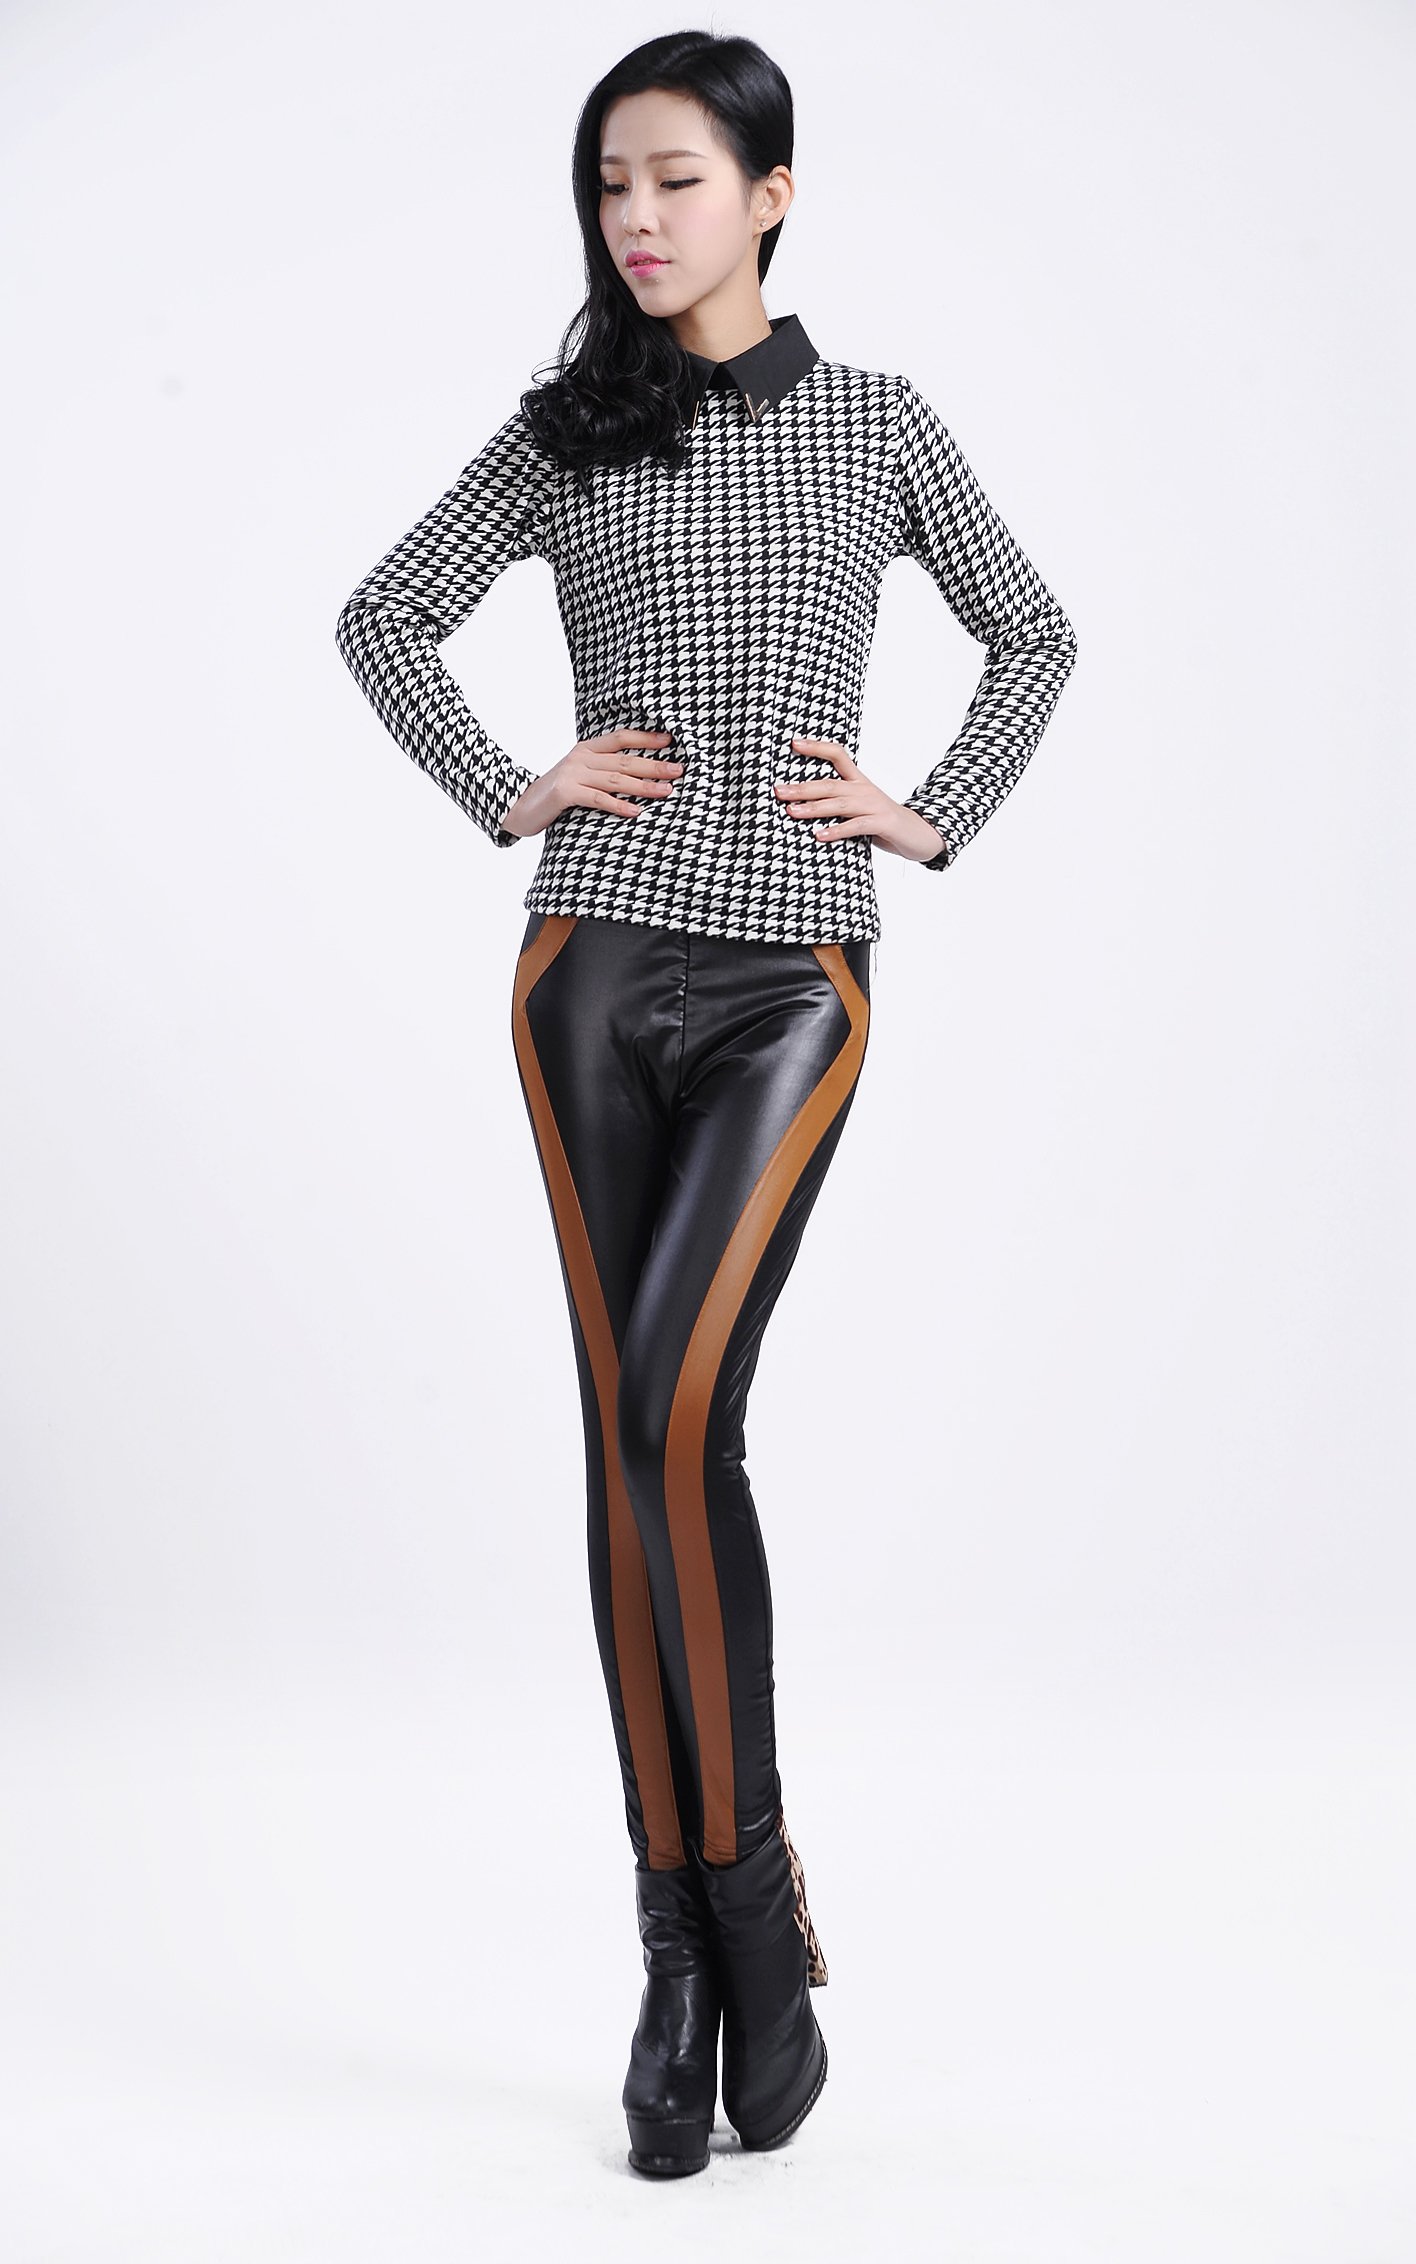 Black Faux Leather Look Leggings with Brown Stripe